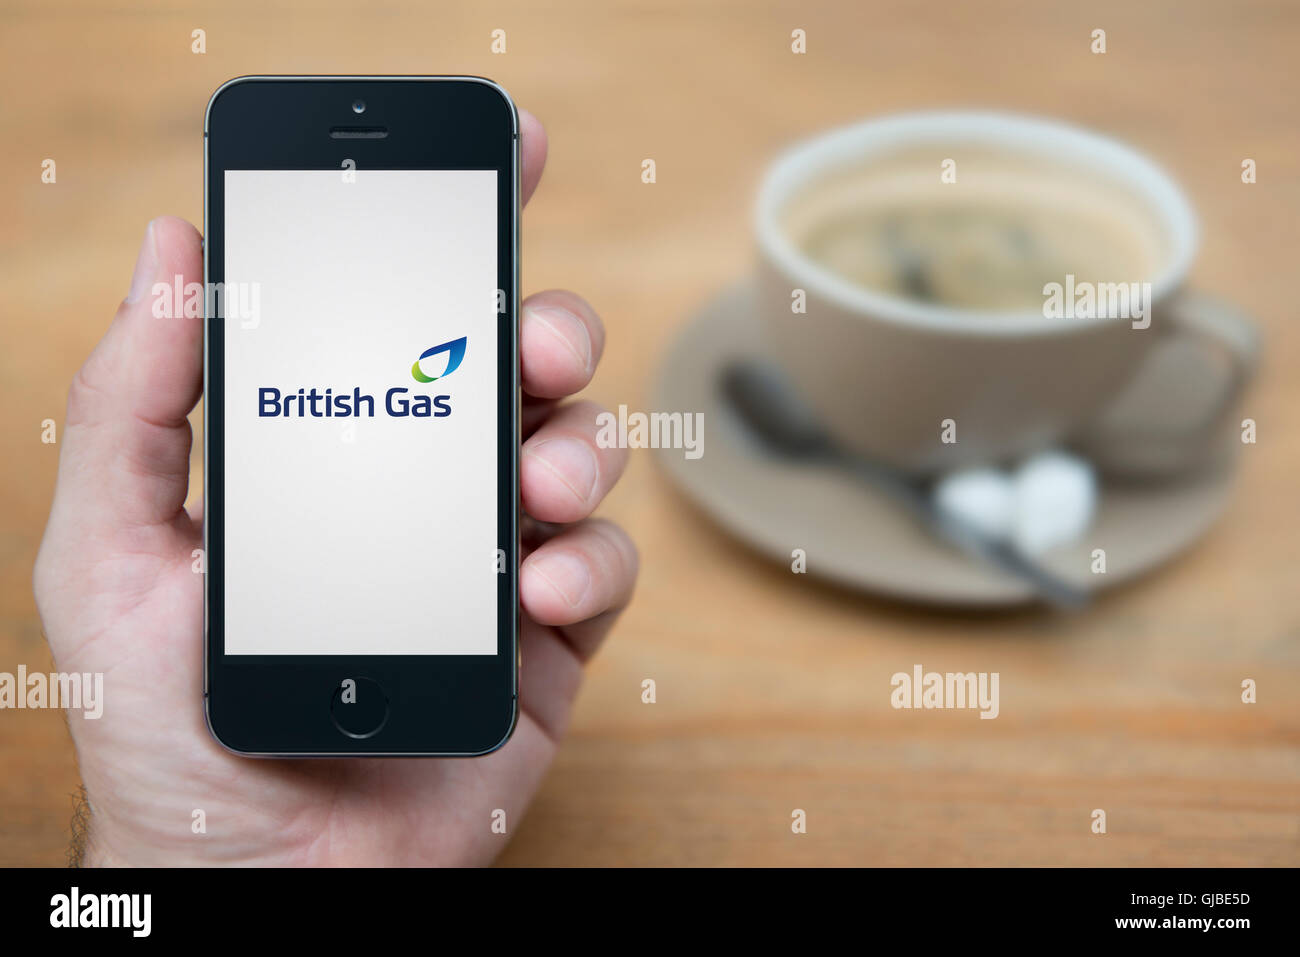 A man looks at his iPhone which displays the British Gas logo, while sat with a cup of coffee (Editorial use only). Stock Photo